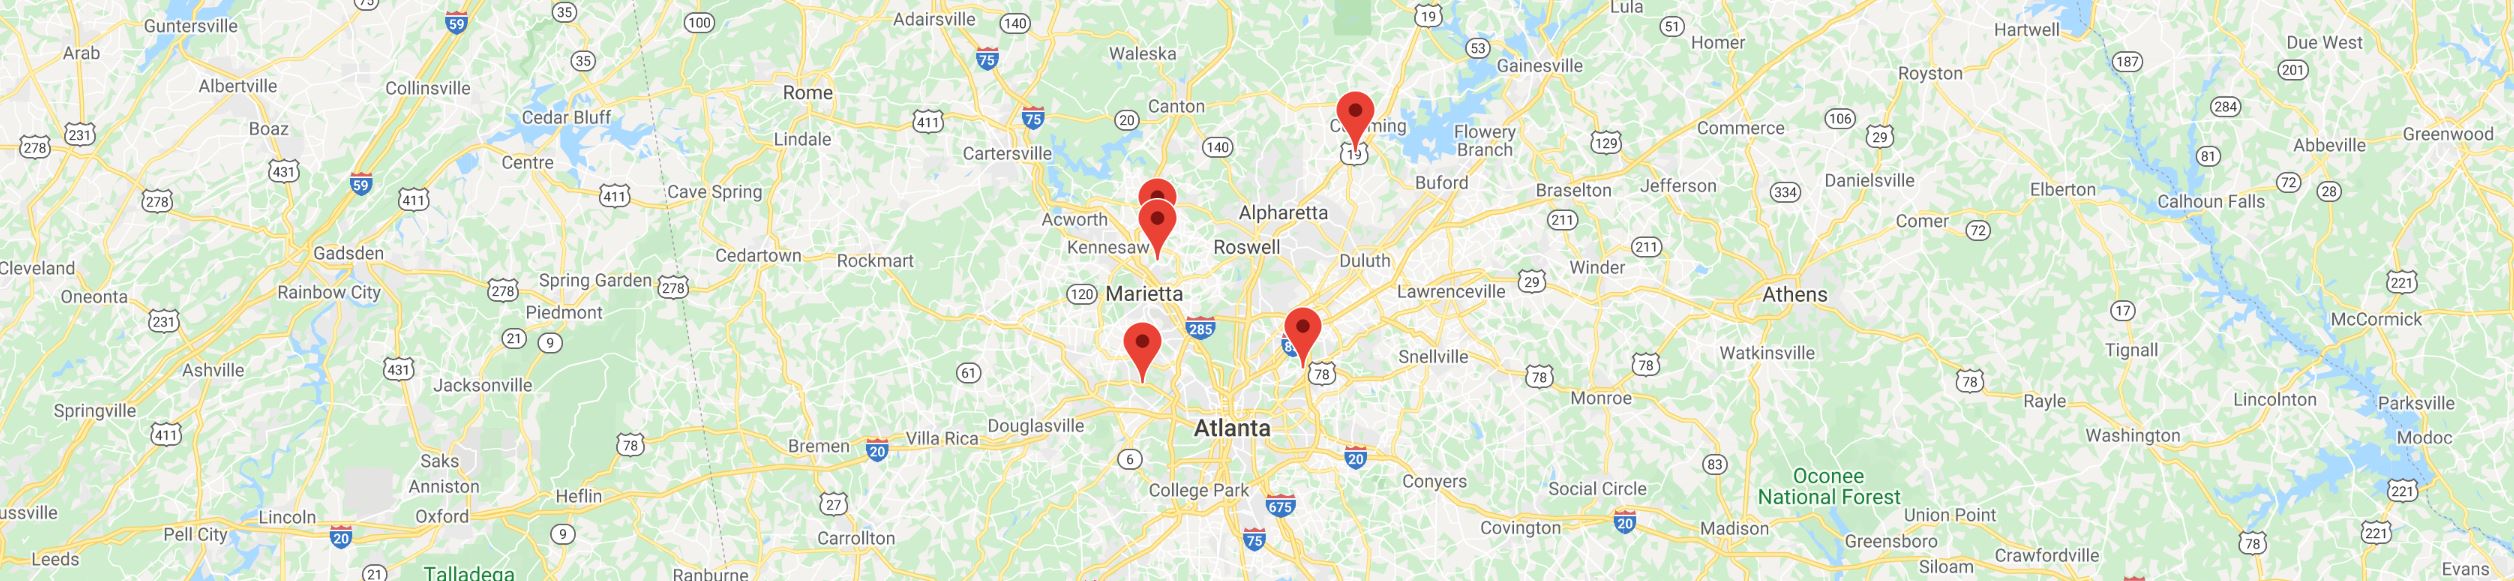 wide-atl-map